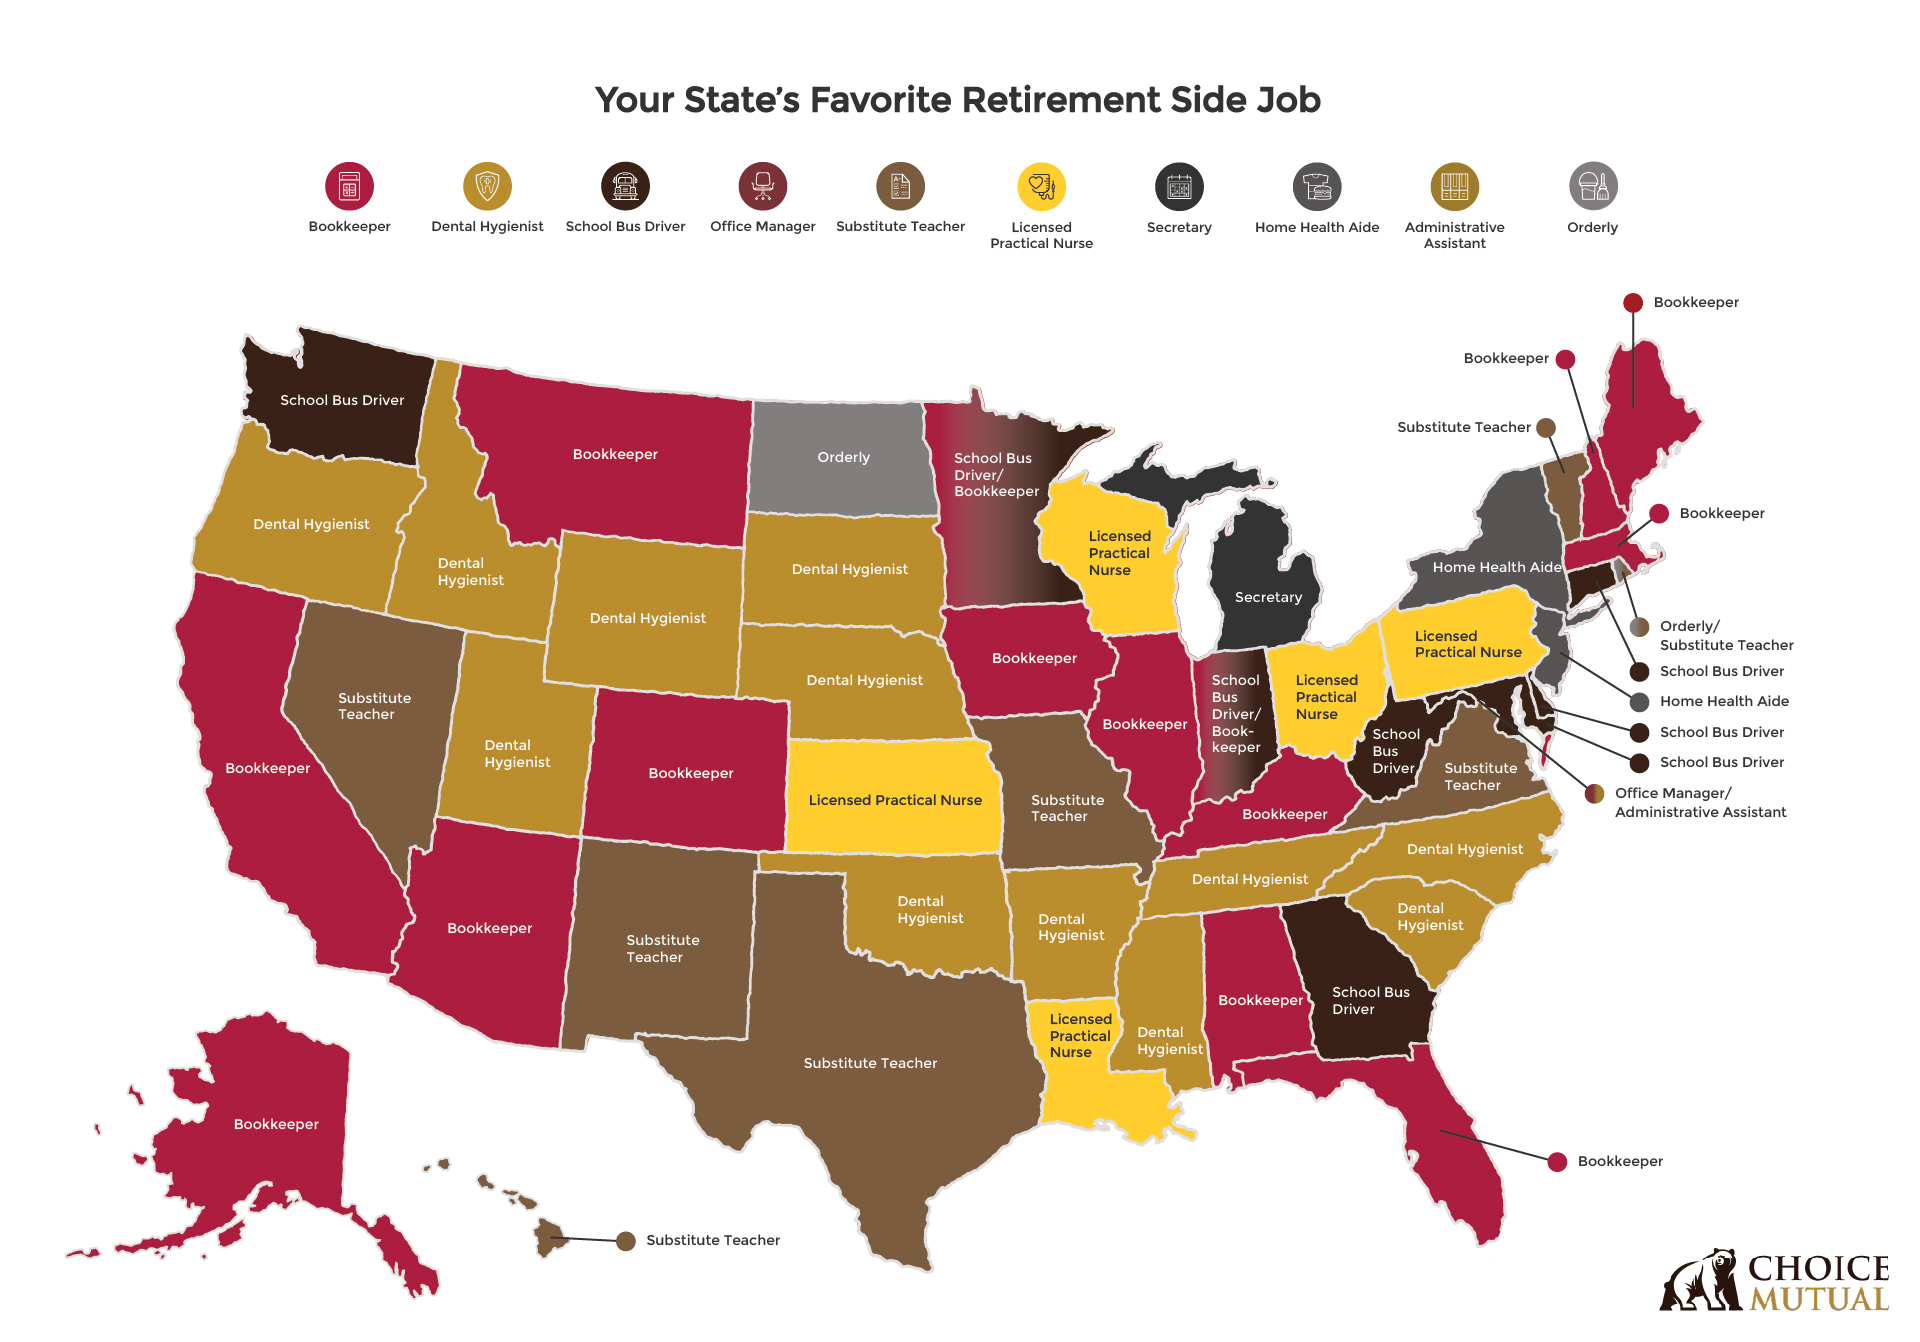 map of most popular retirement side job in each state